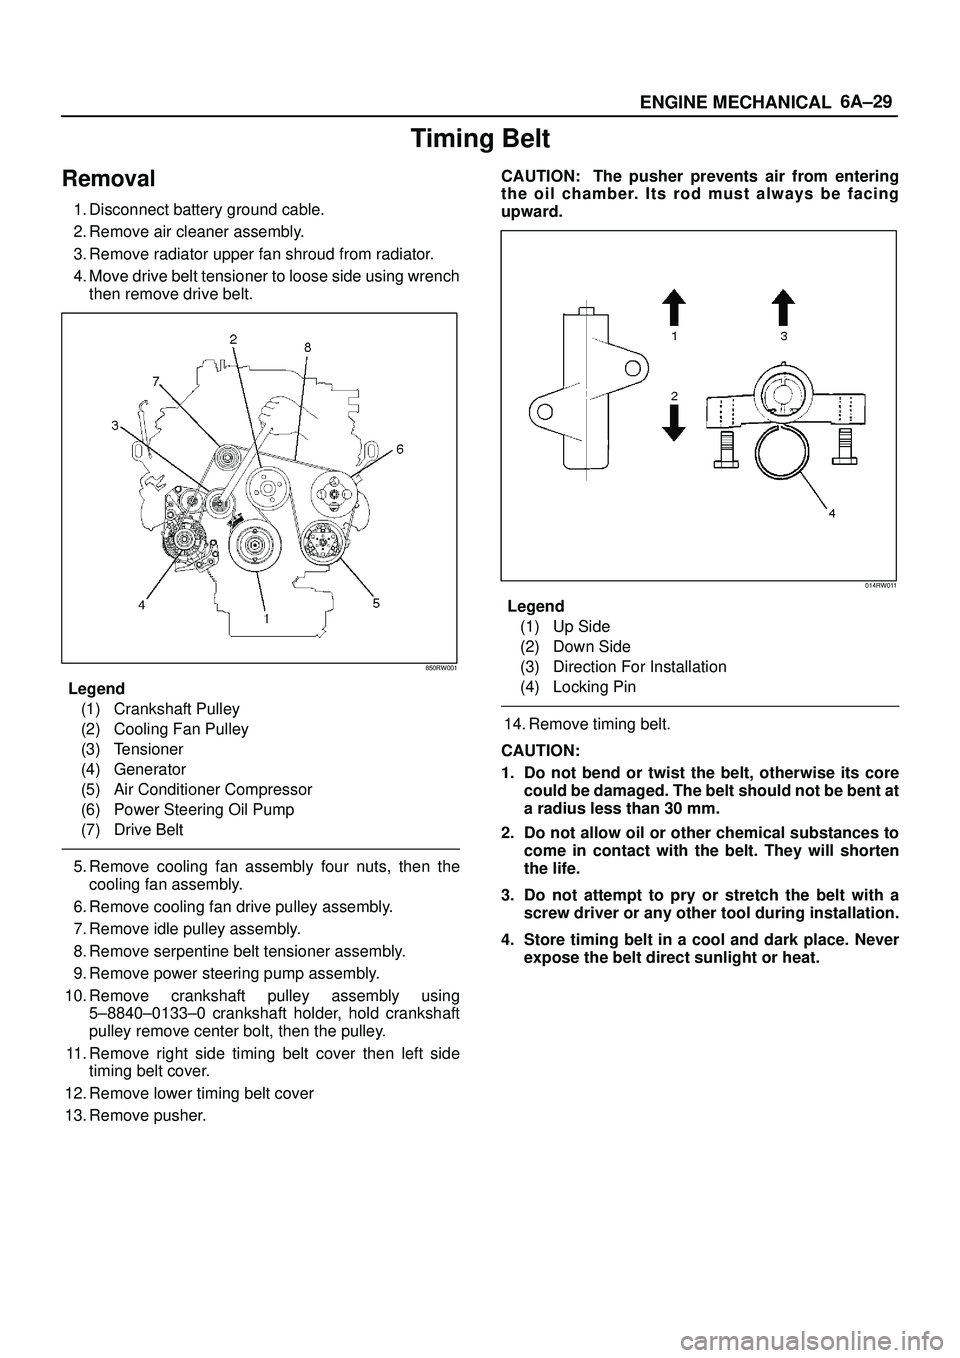 ISUZU TROOPER 1998  Service Repair Manual 6A±29
ENGINE MECHANICAL
Timing Belt
Removal
1. Disconnect battery ground cable.
2. Remove air cleaner assembly.
3. Remove radiator upper fan shroud from radiator.
4. Move drive belt tensioner to loos